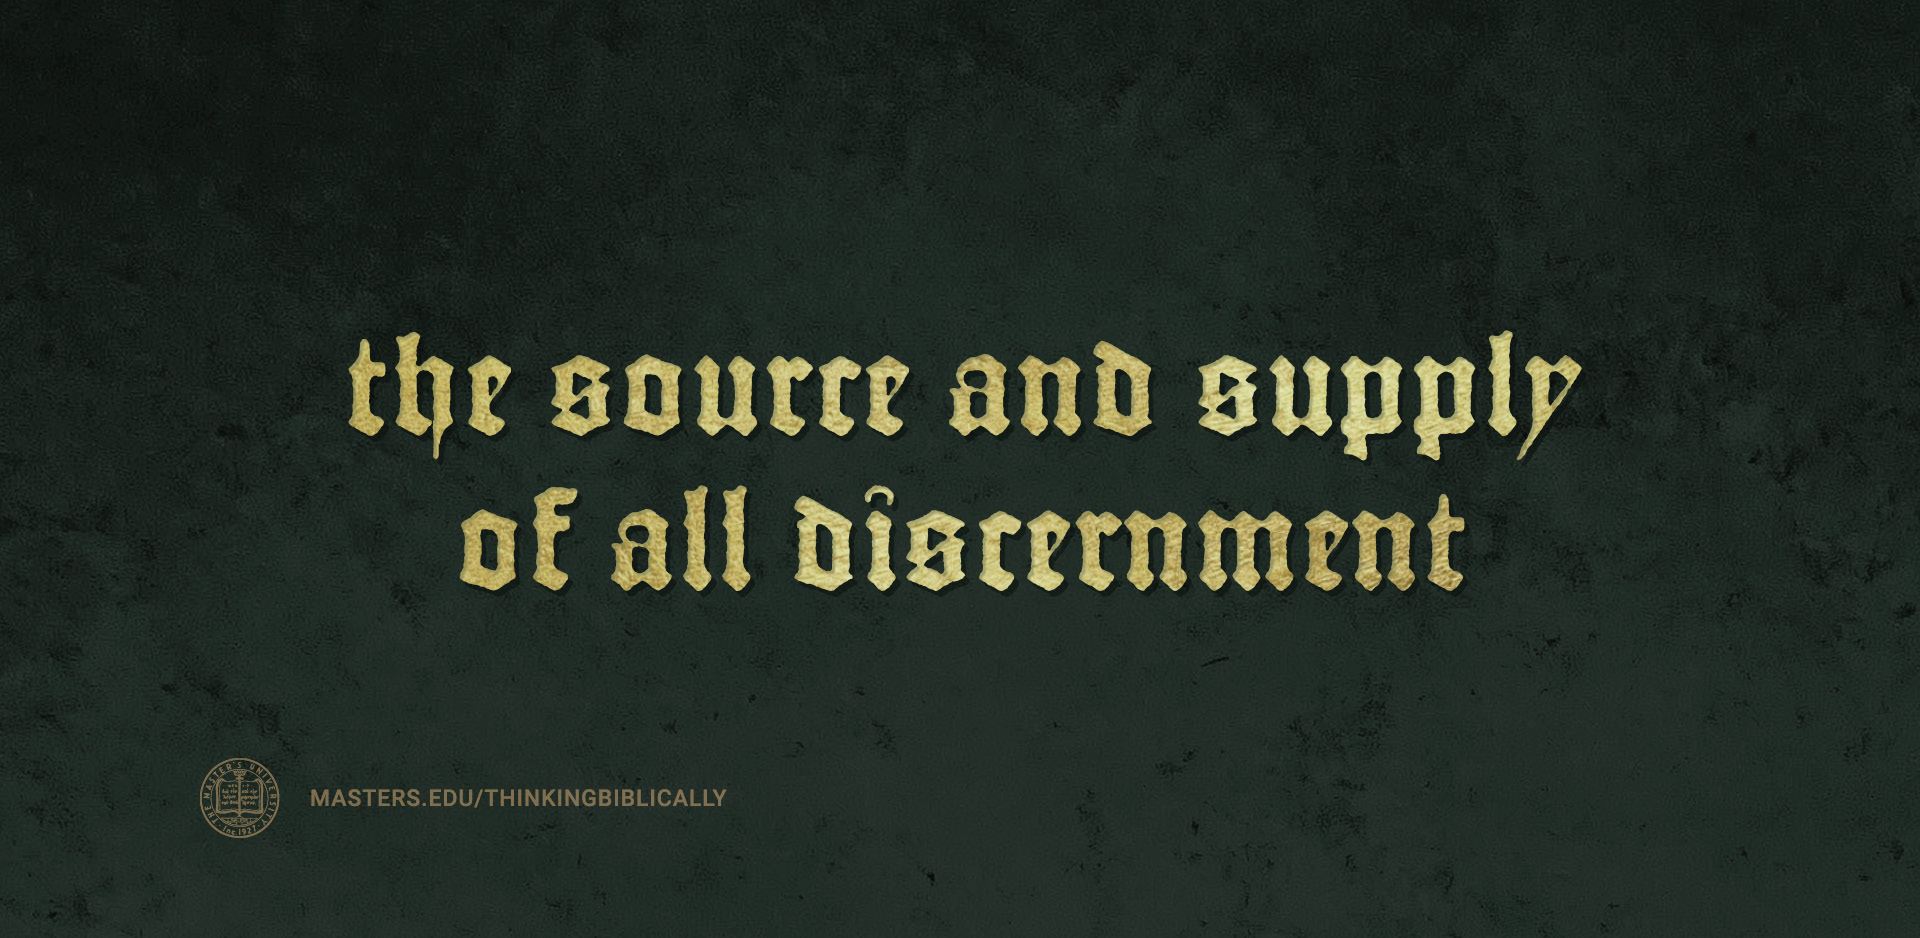 The Source and Supply of All Discernment Featured Image